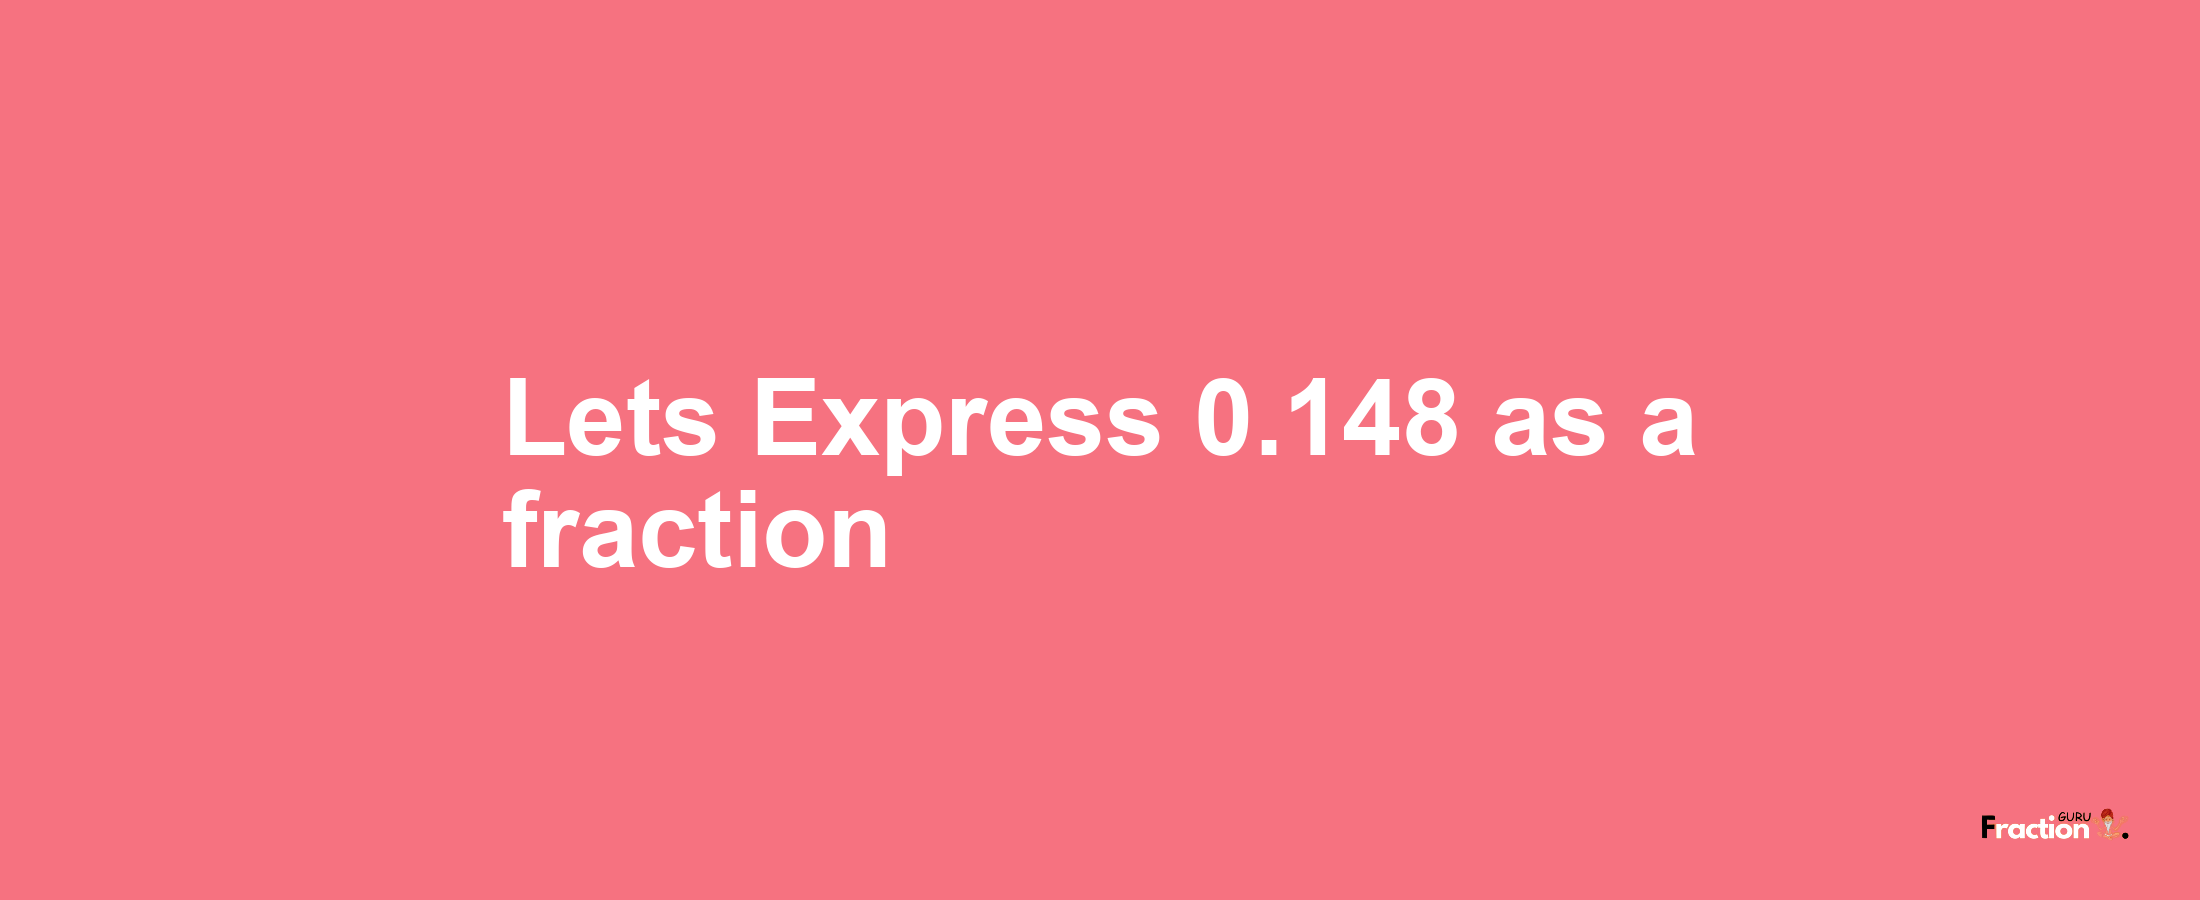 Lets Express 0.148 as afraction